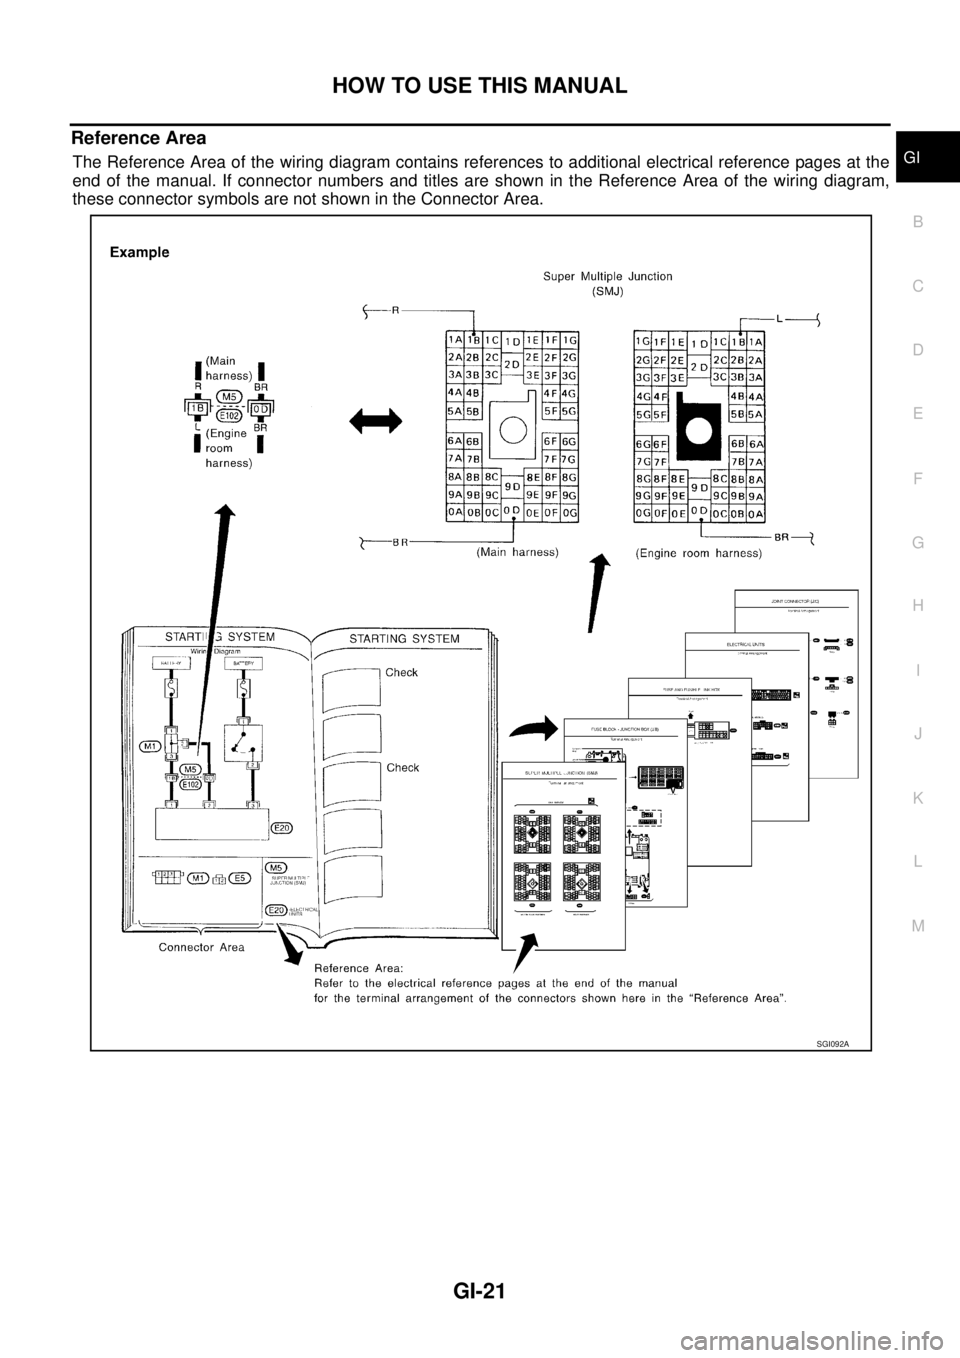 NISSAN X-TRAIL 2003  Service Repair Manual HOW TO USE THIS MANUAL
GI-21
C
D
E
F
G
H
I
J
K
L
MB
GI
 
Reference Area
The Reference Area of the wiring diagram contains references to additional electrical reference pages at the
end of the manual. 